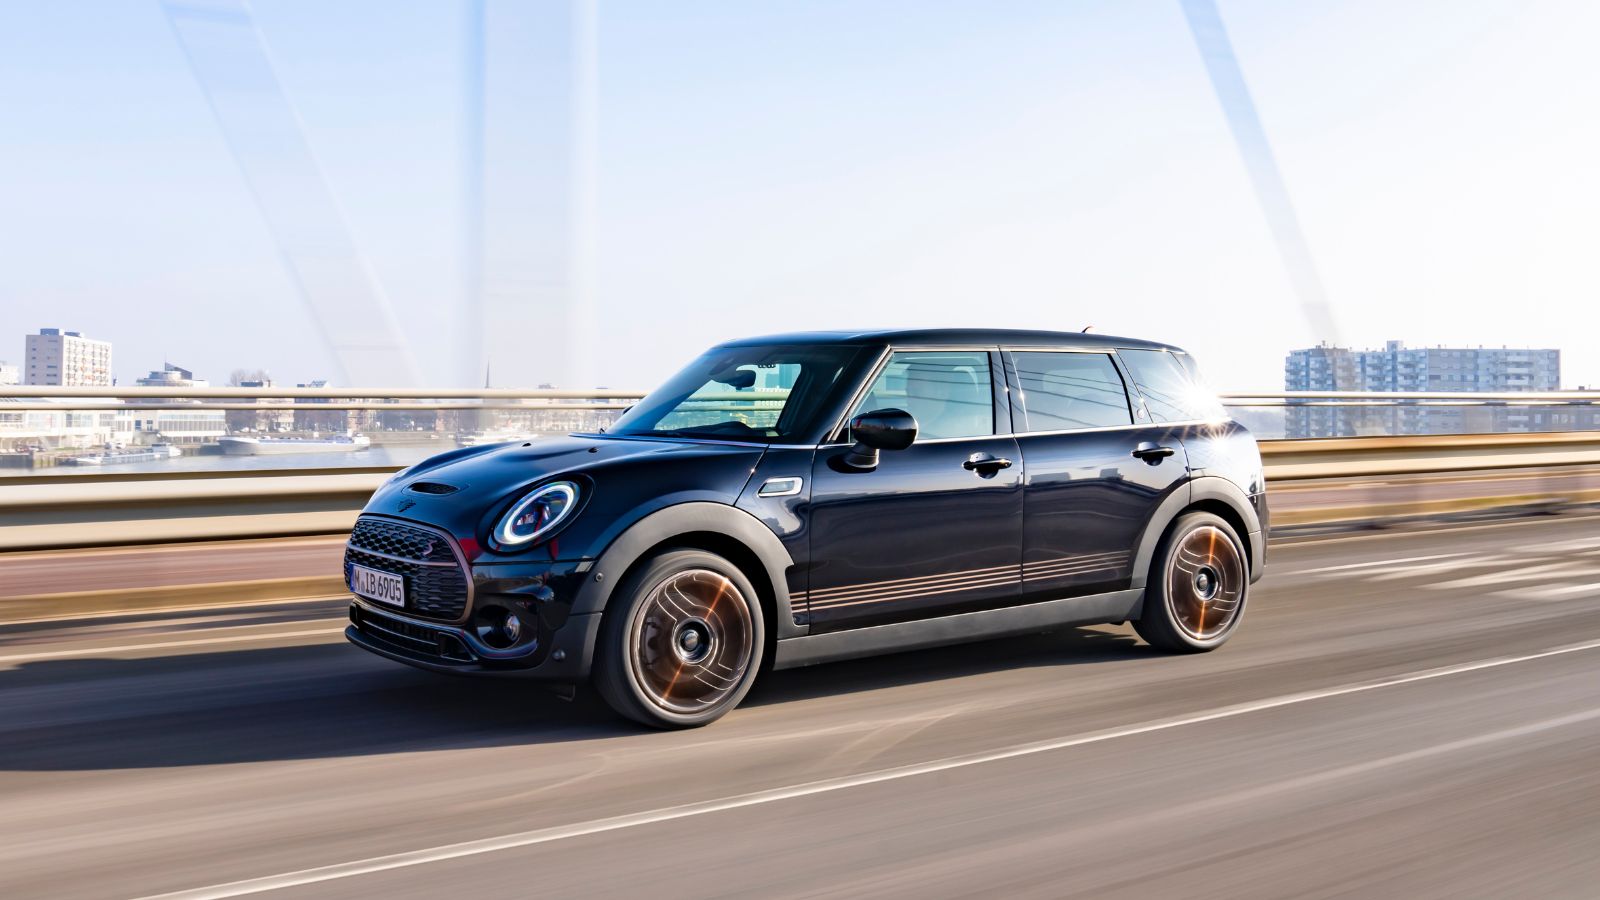 Report: Mini Clubman not returning for new generation - Driven Car